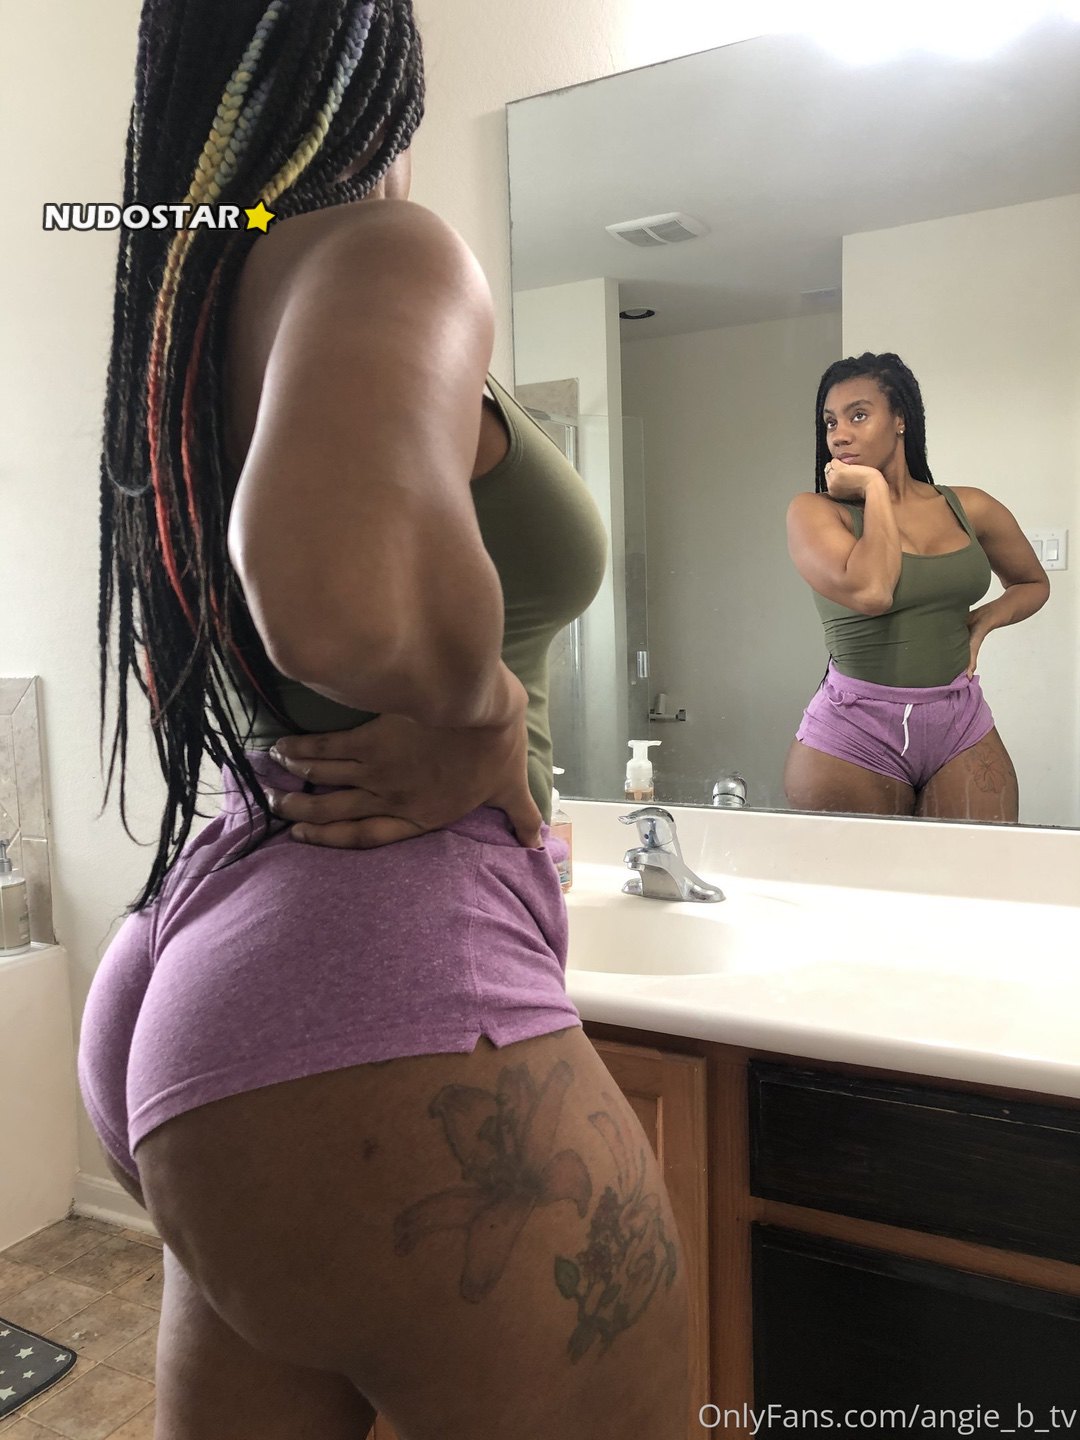 angie_b_tv Onlyfans Nudes Leaks (37 photos + 4 videos)